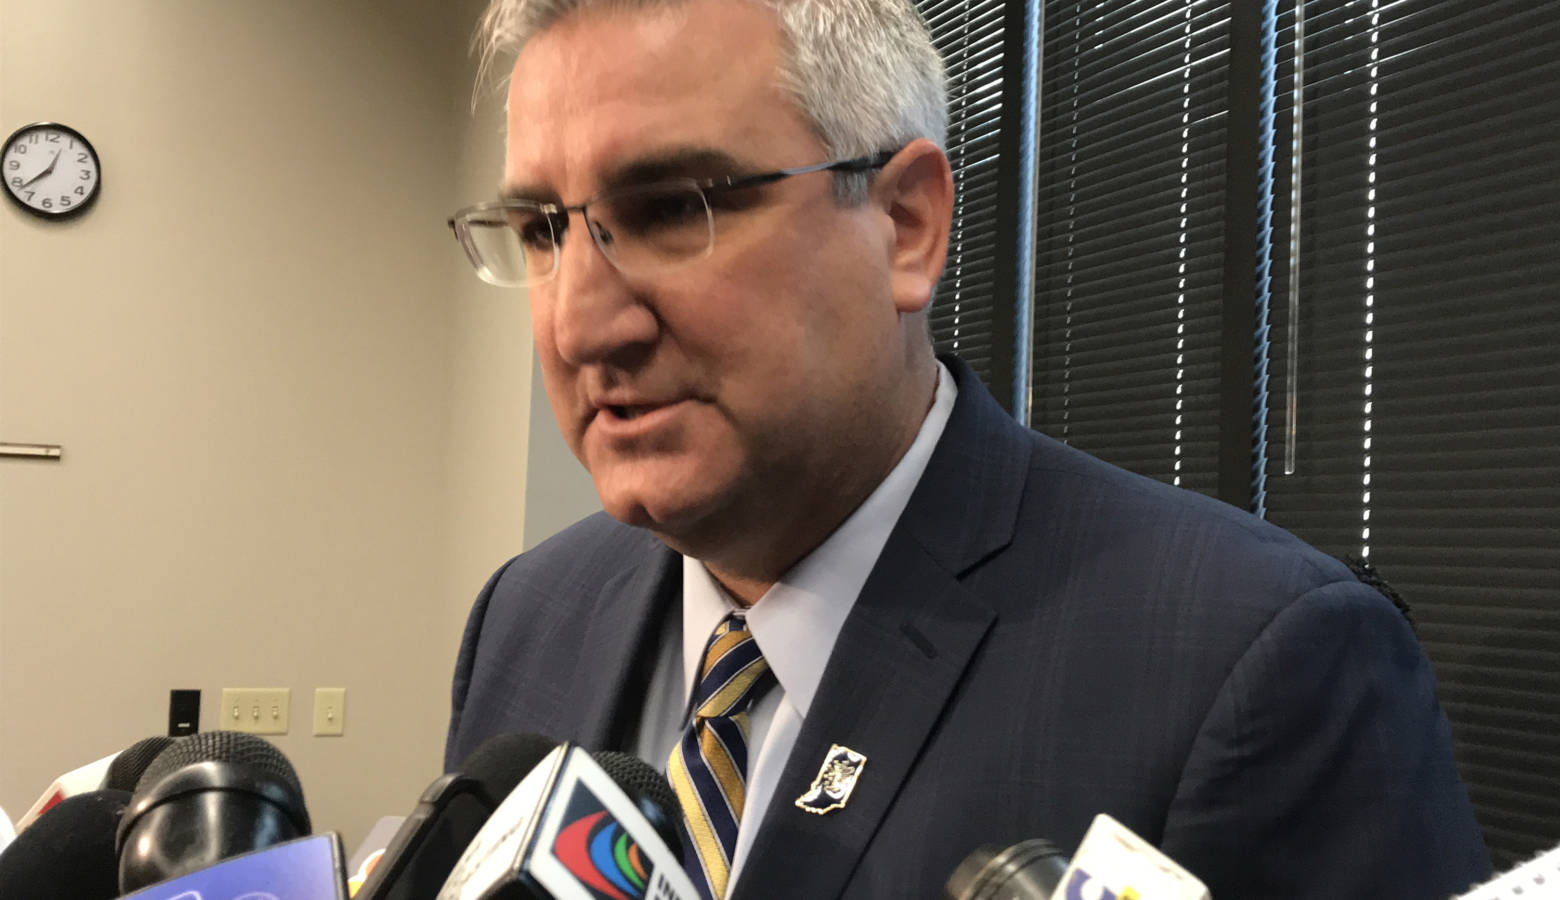 Gov. Eric Holcomb pledged to work next session to ensure a hate crimes bill passes after vandals defaced a Carmel synagogue with anti-Semitic graffiti. (Brandon Smith/IPB News)